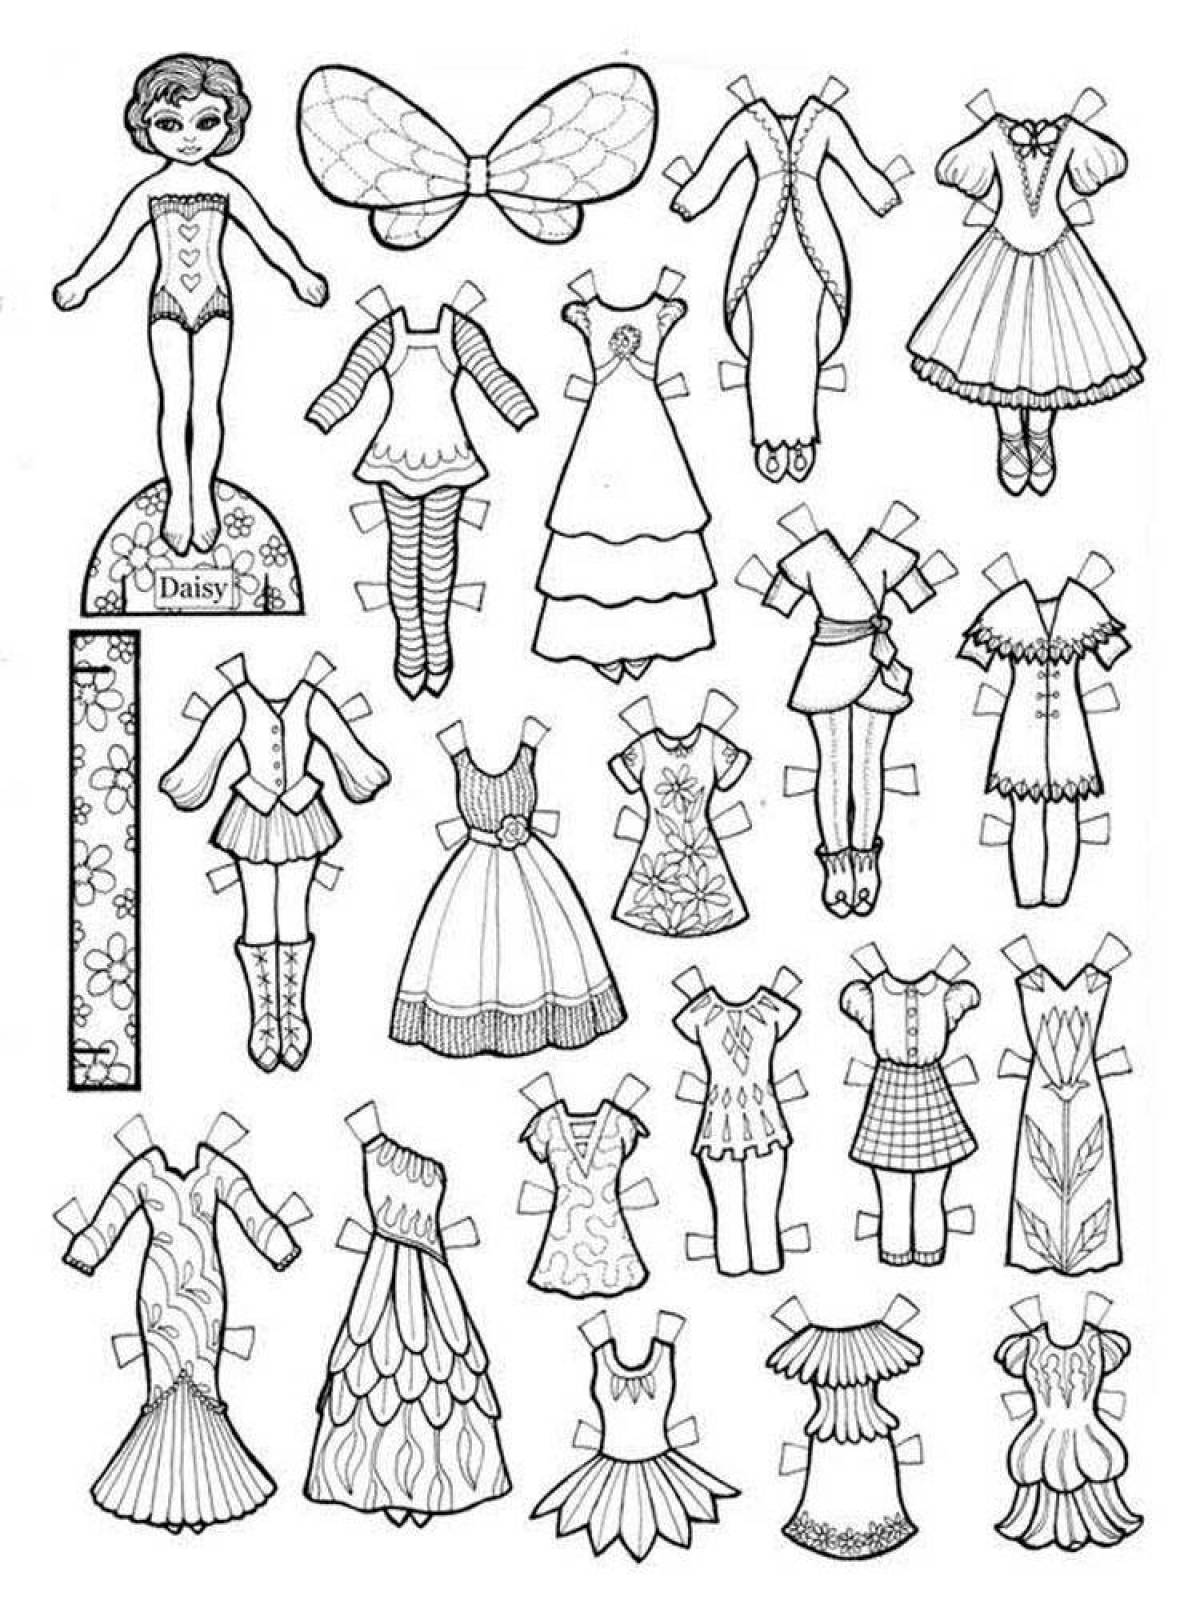 Coloring page dazzling doll dress